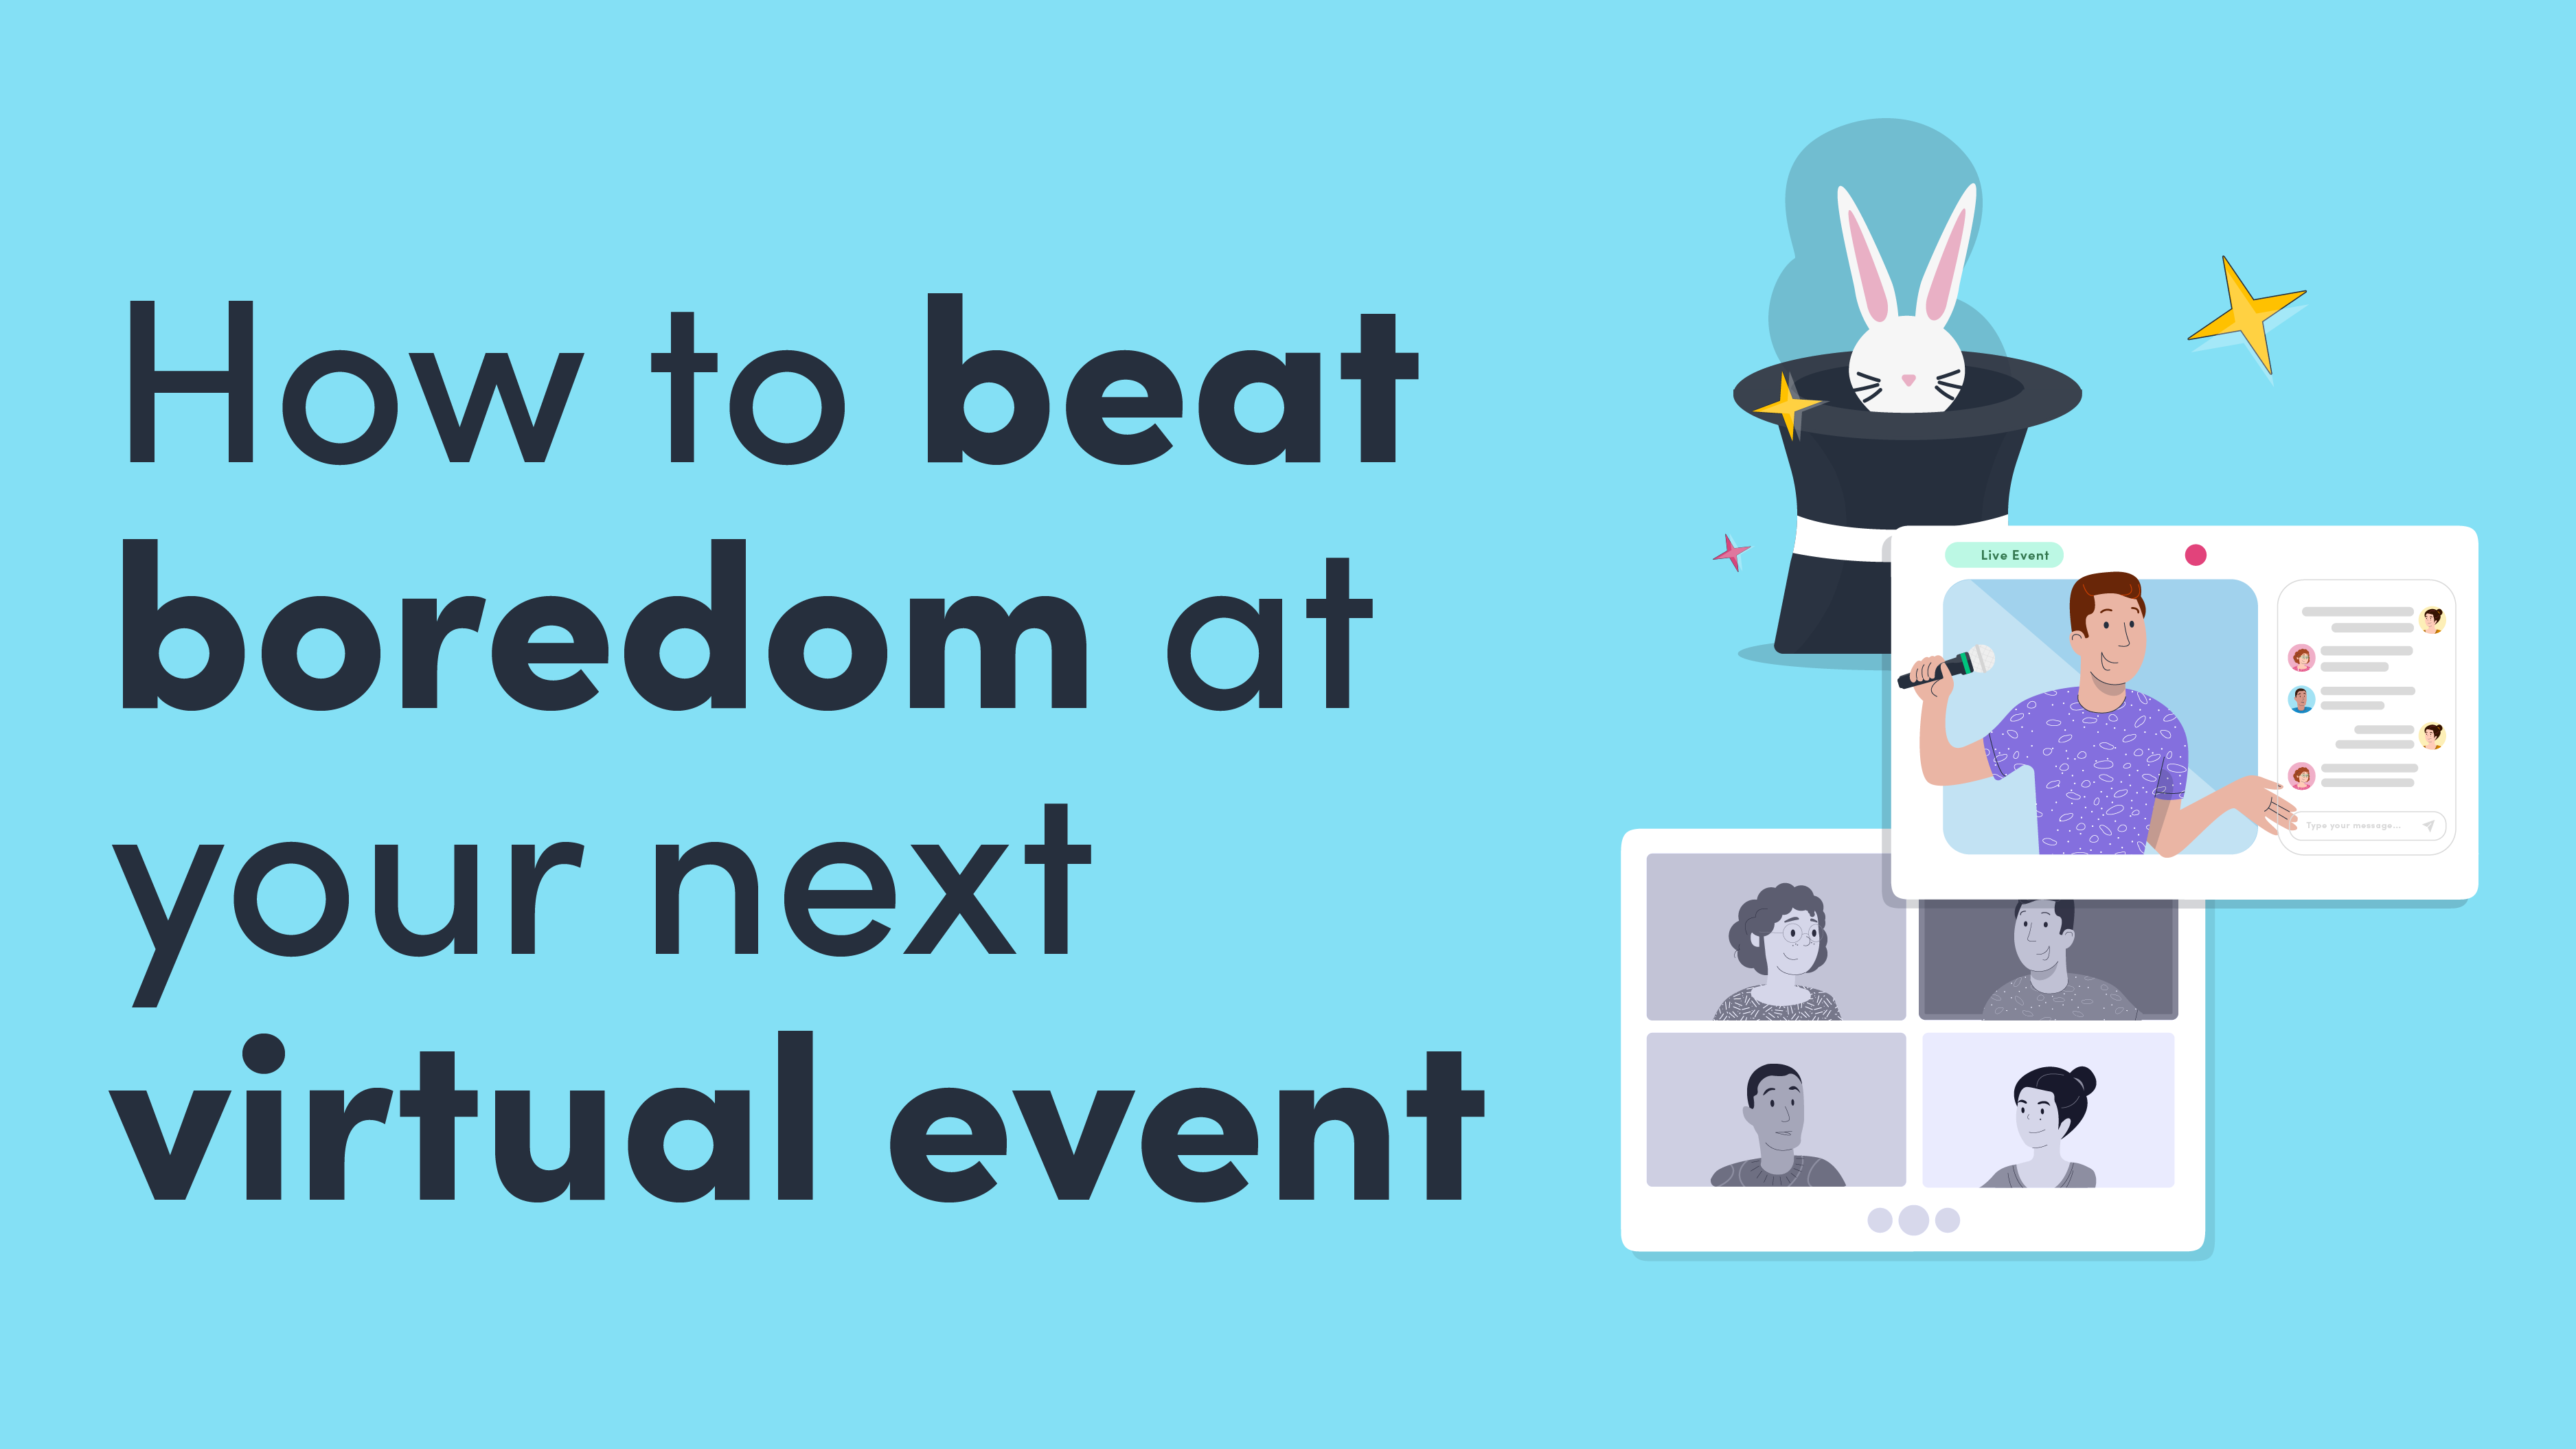 How to beat boredom at your next virtual event